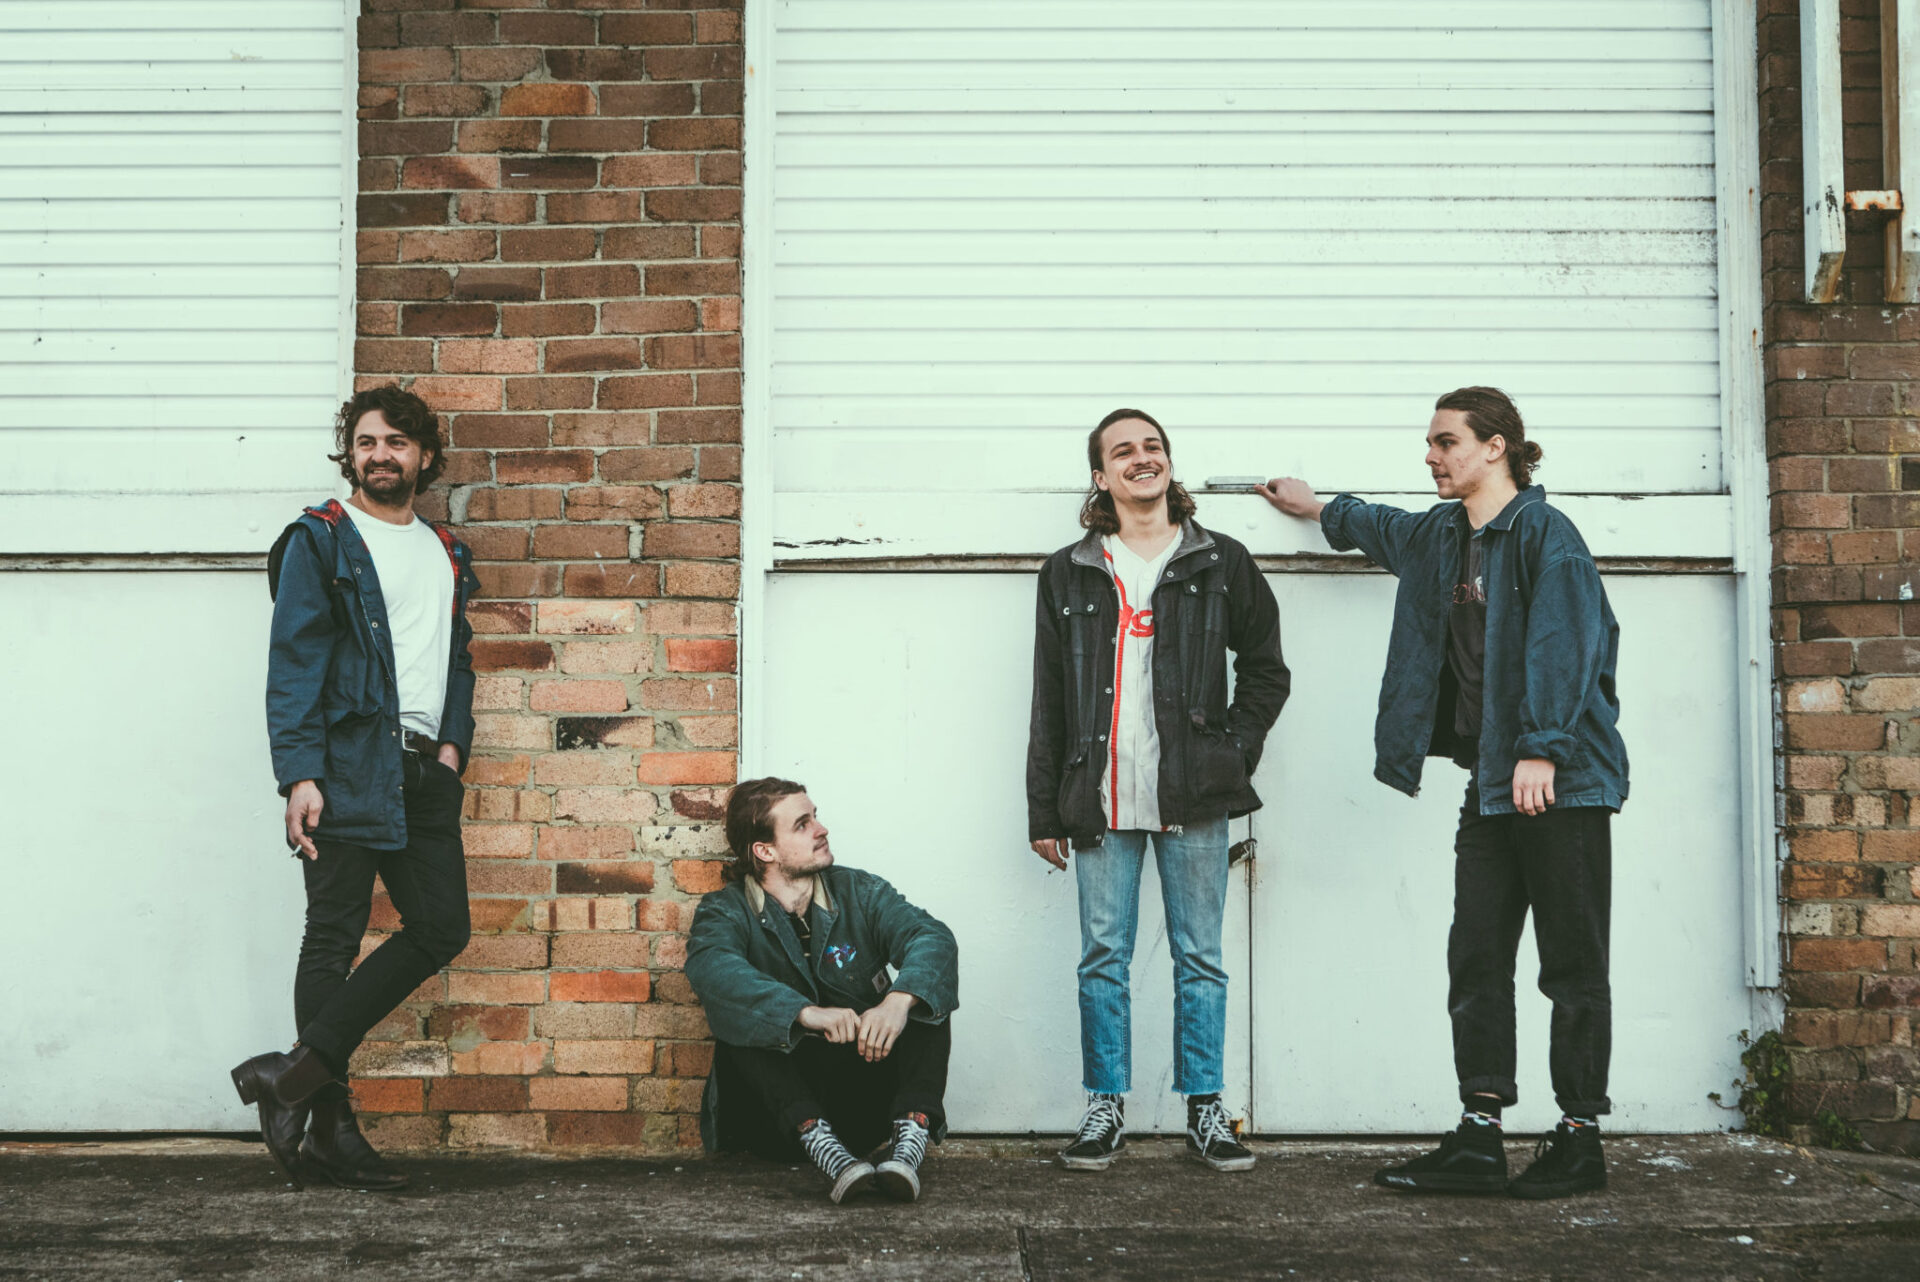 PREMIERE: On their new single, Letters to Lions beg you to “Come Around”